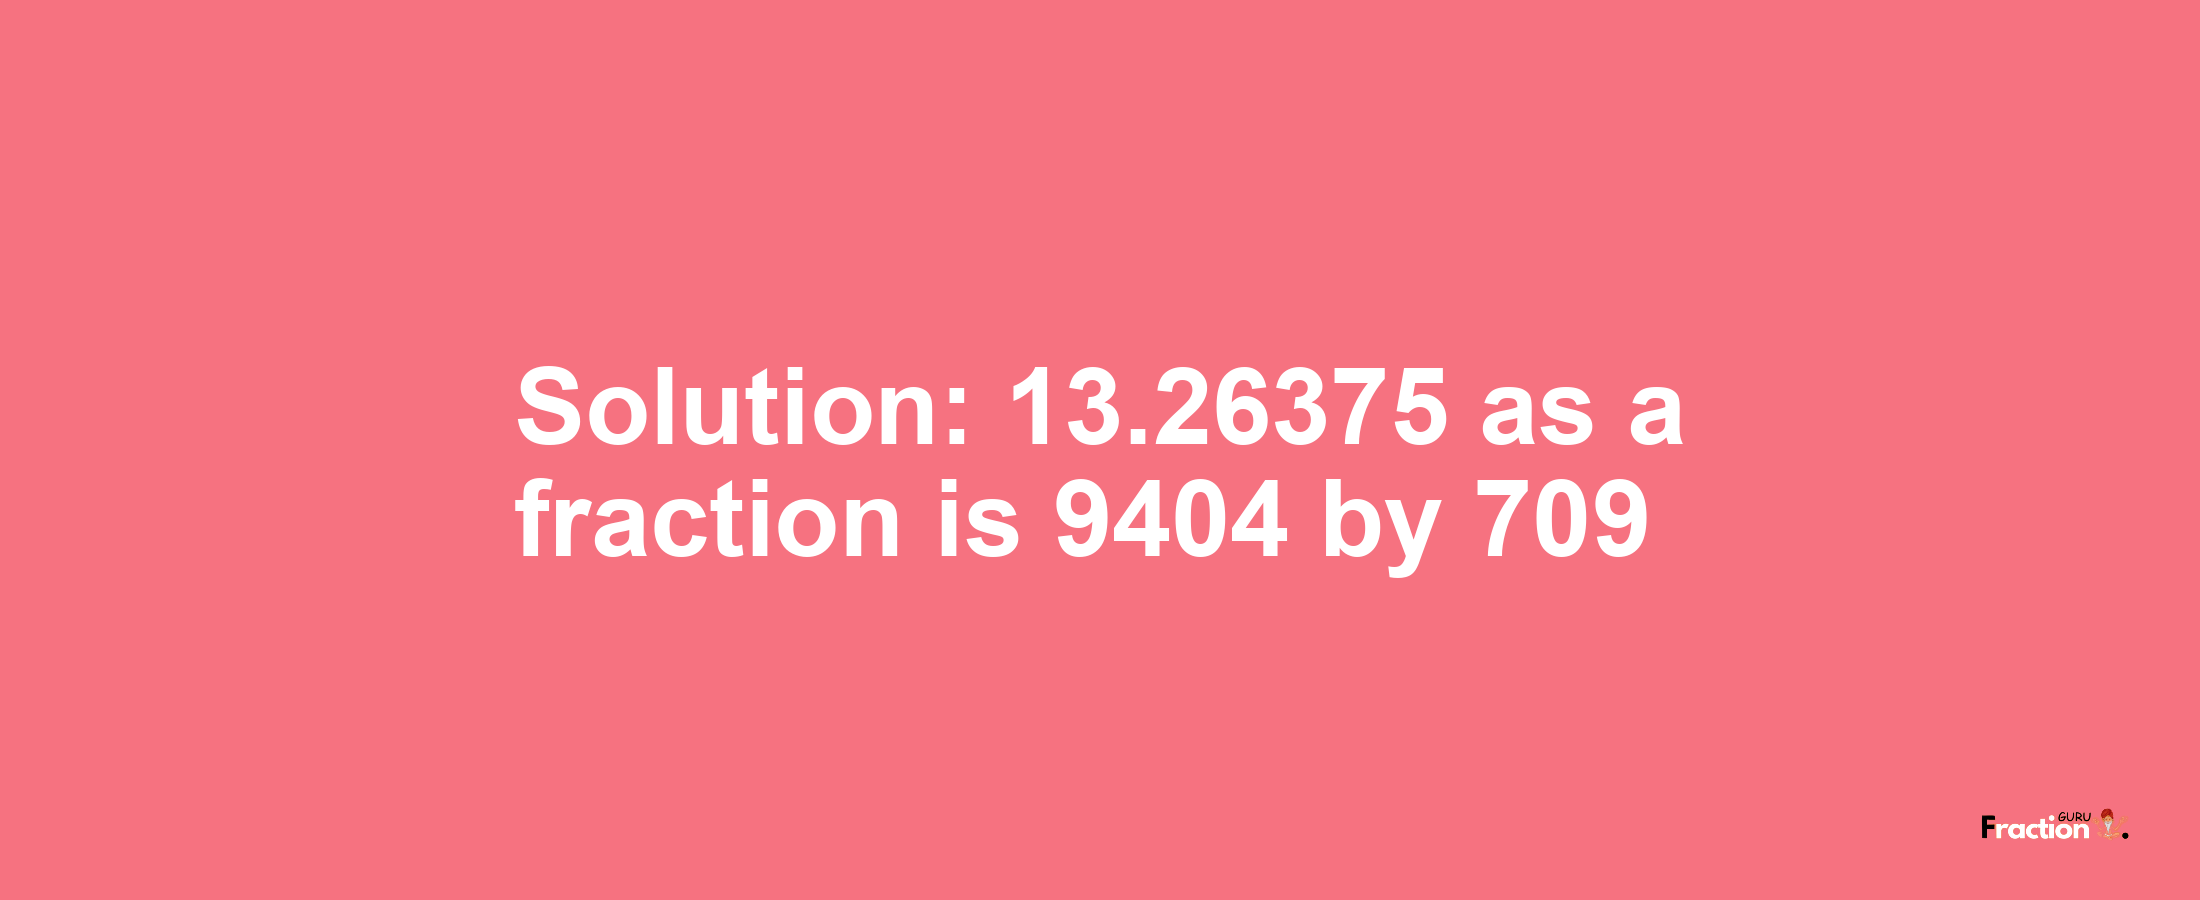 Solution:13.26375 as a fraction is 9404/709